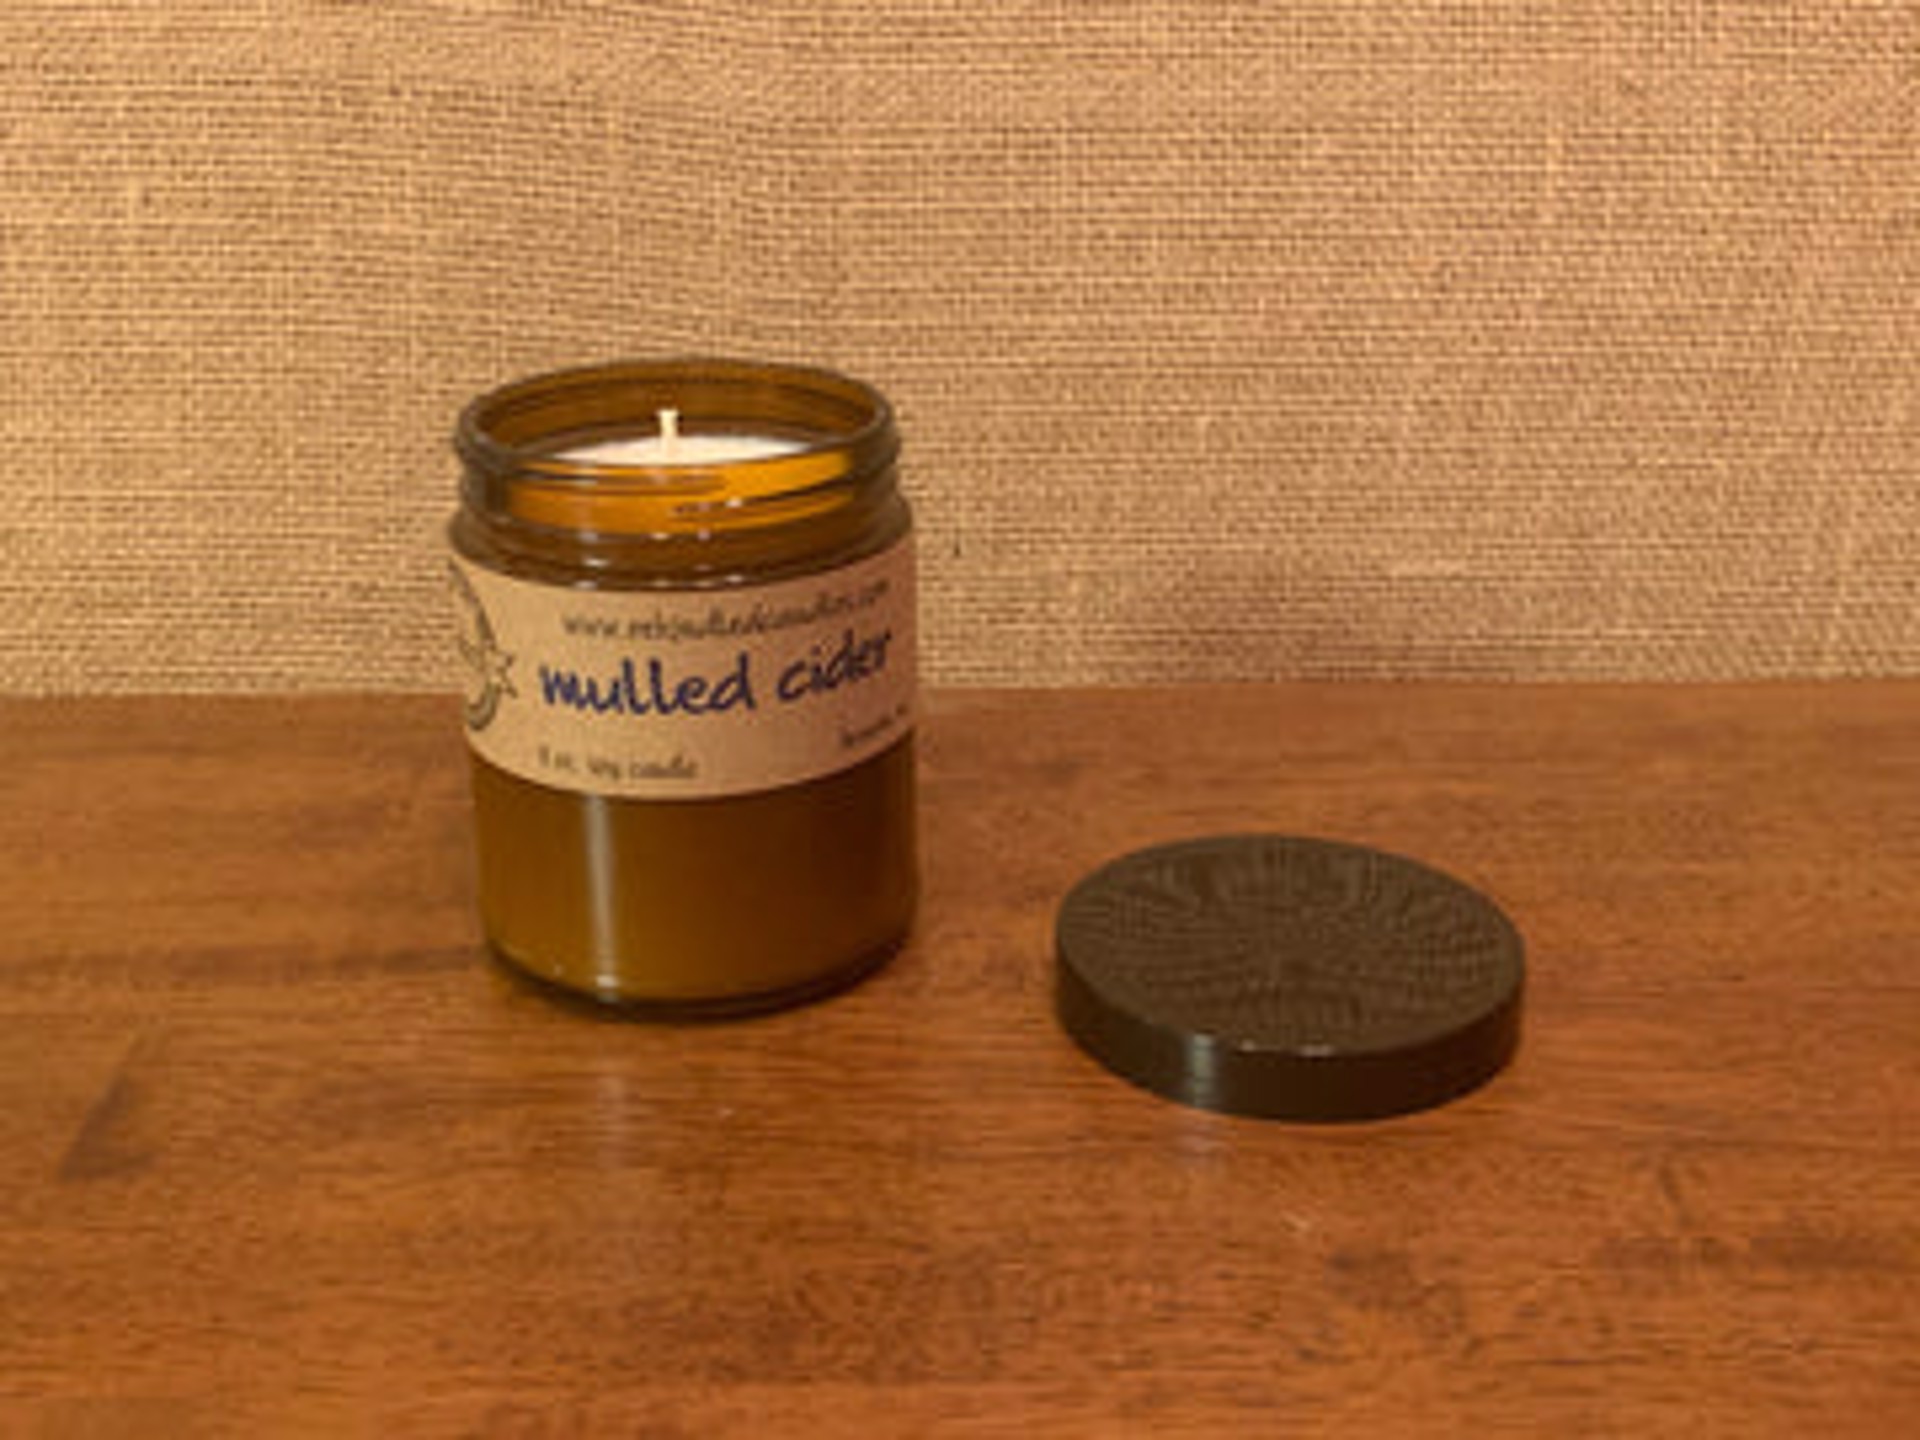 Mulled Cider Amber Jar Candle by re-kindled candle company